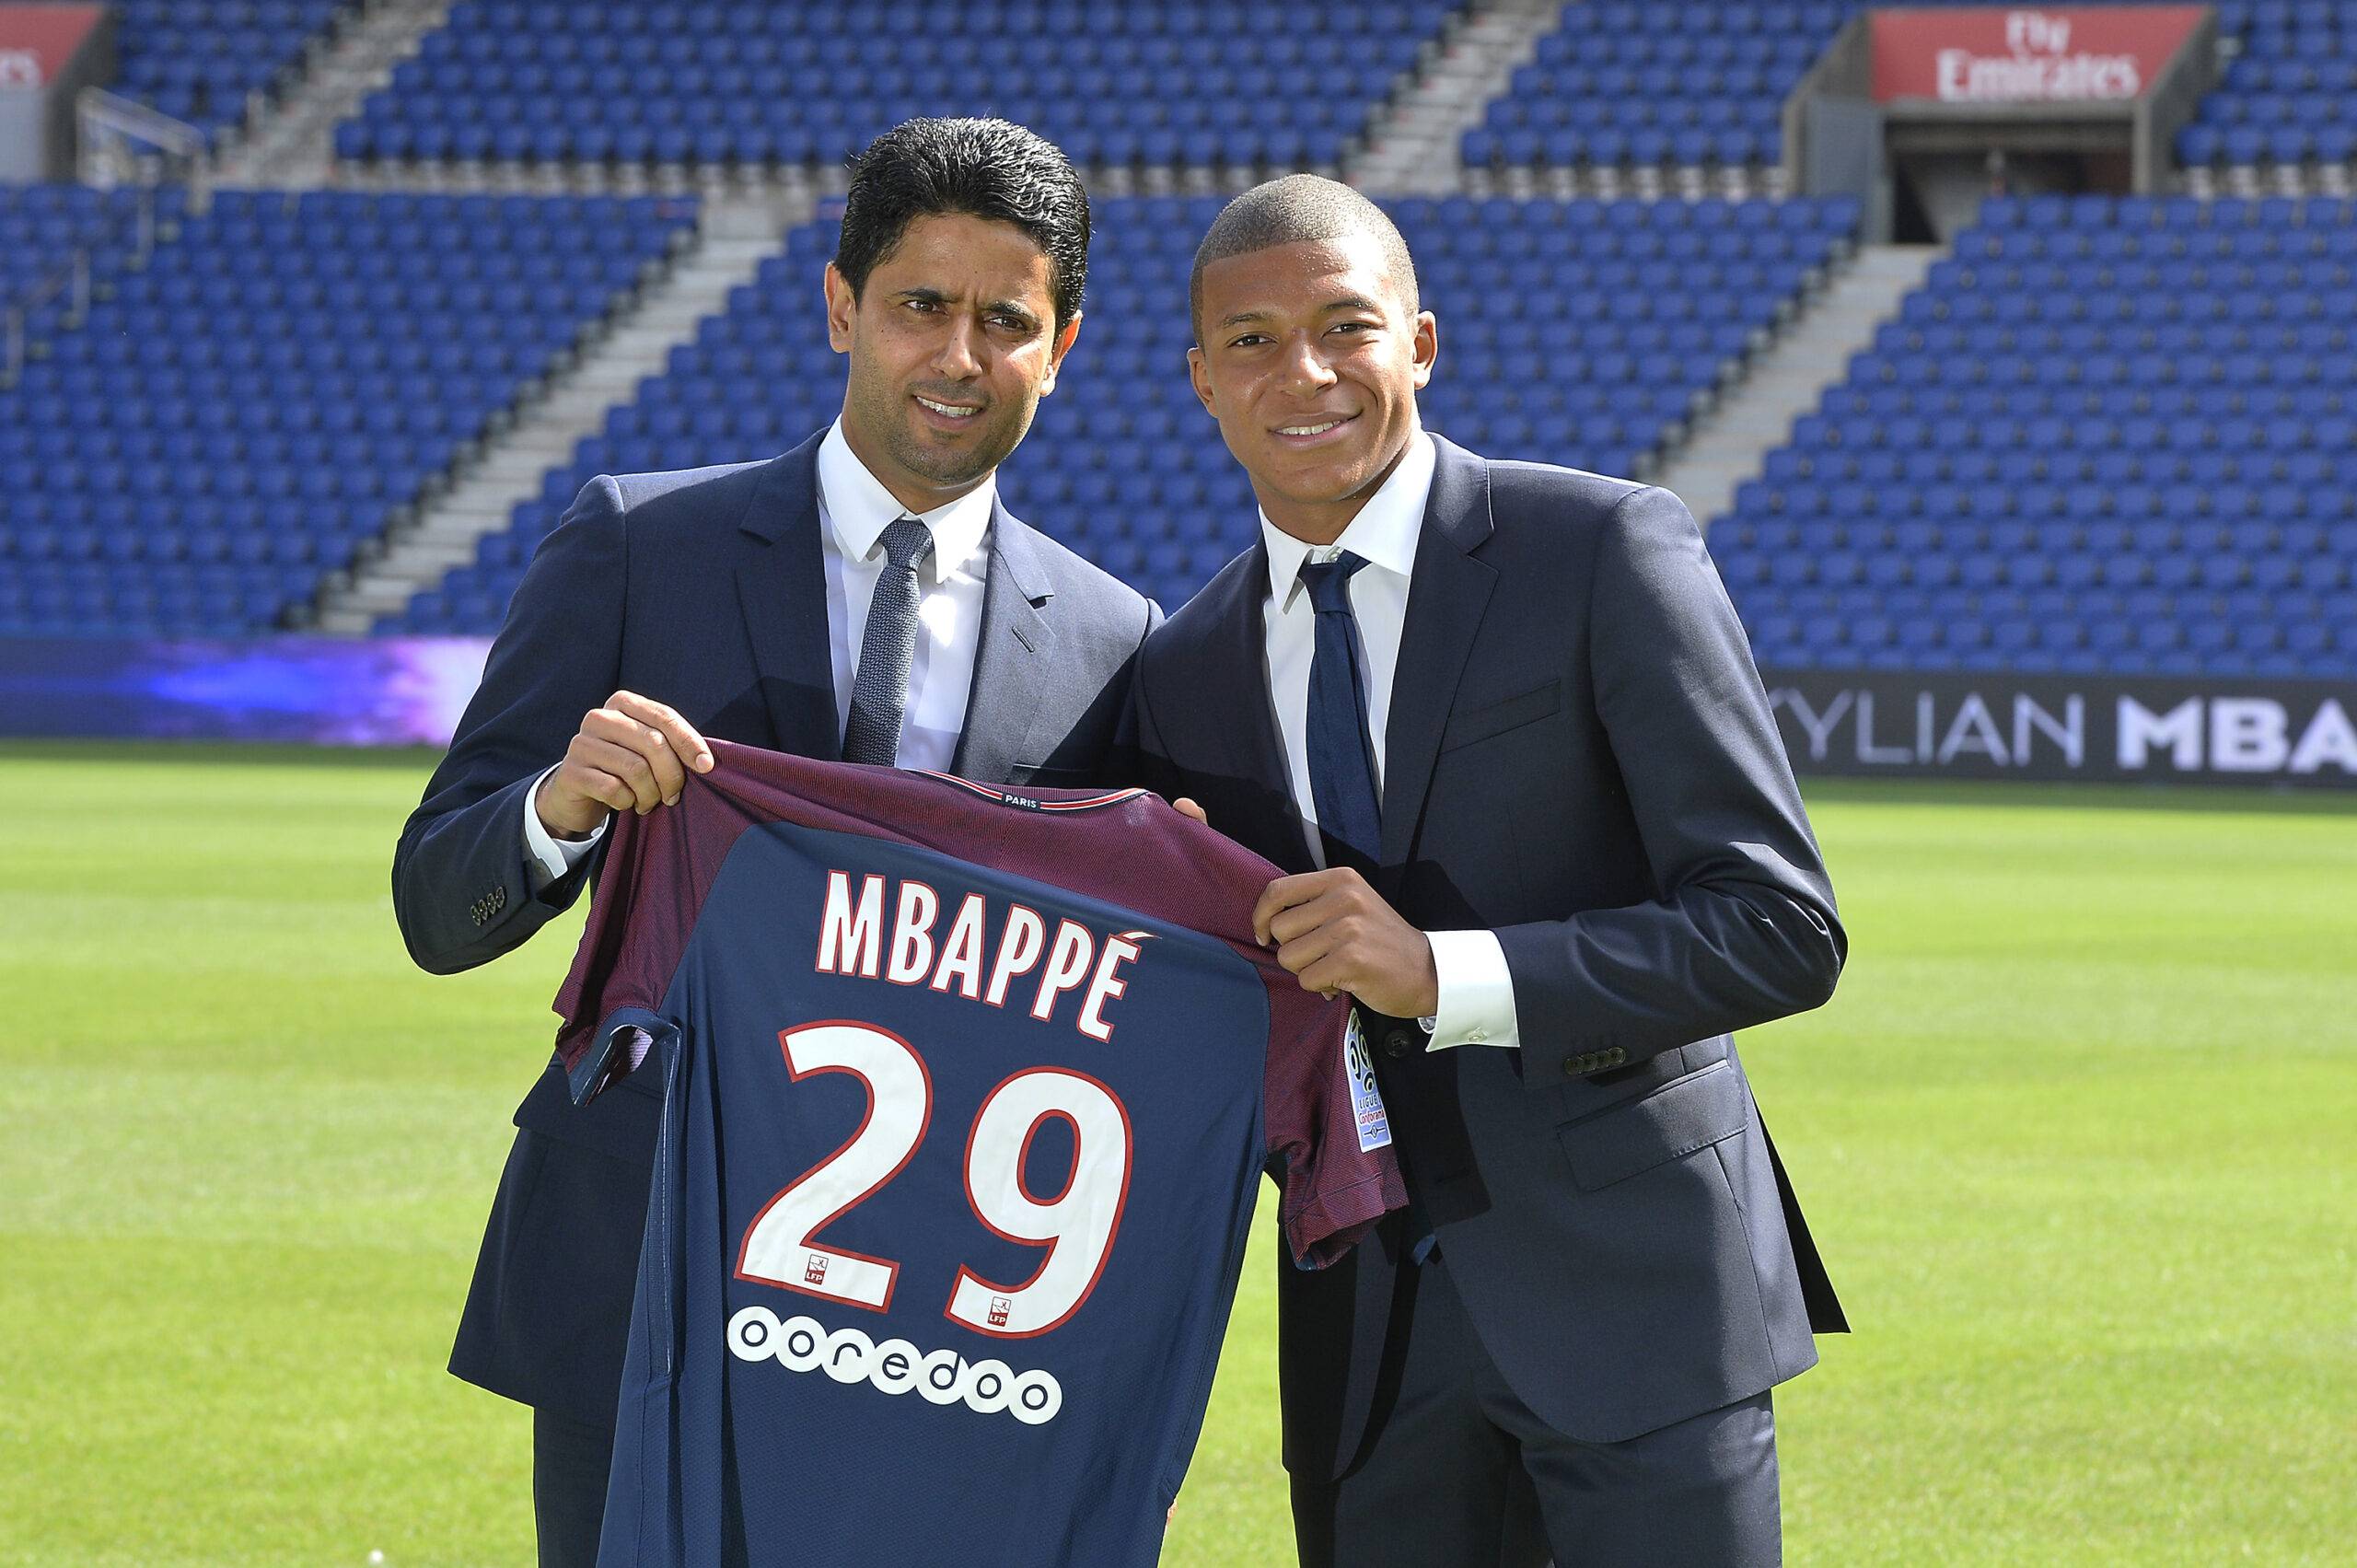 Mbappe signs for PSG.